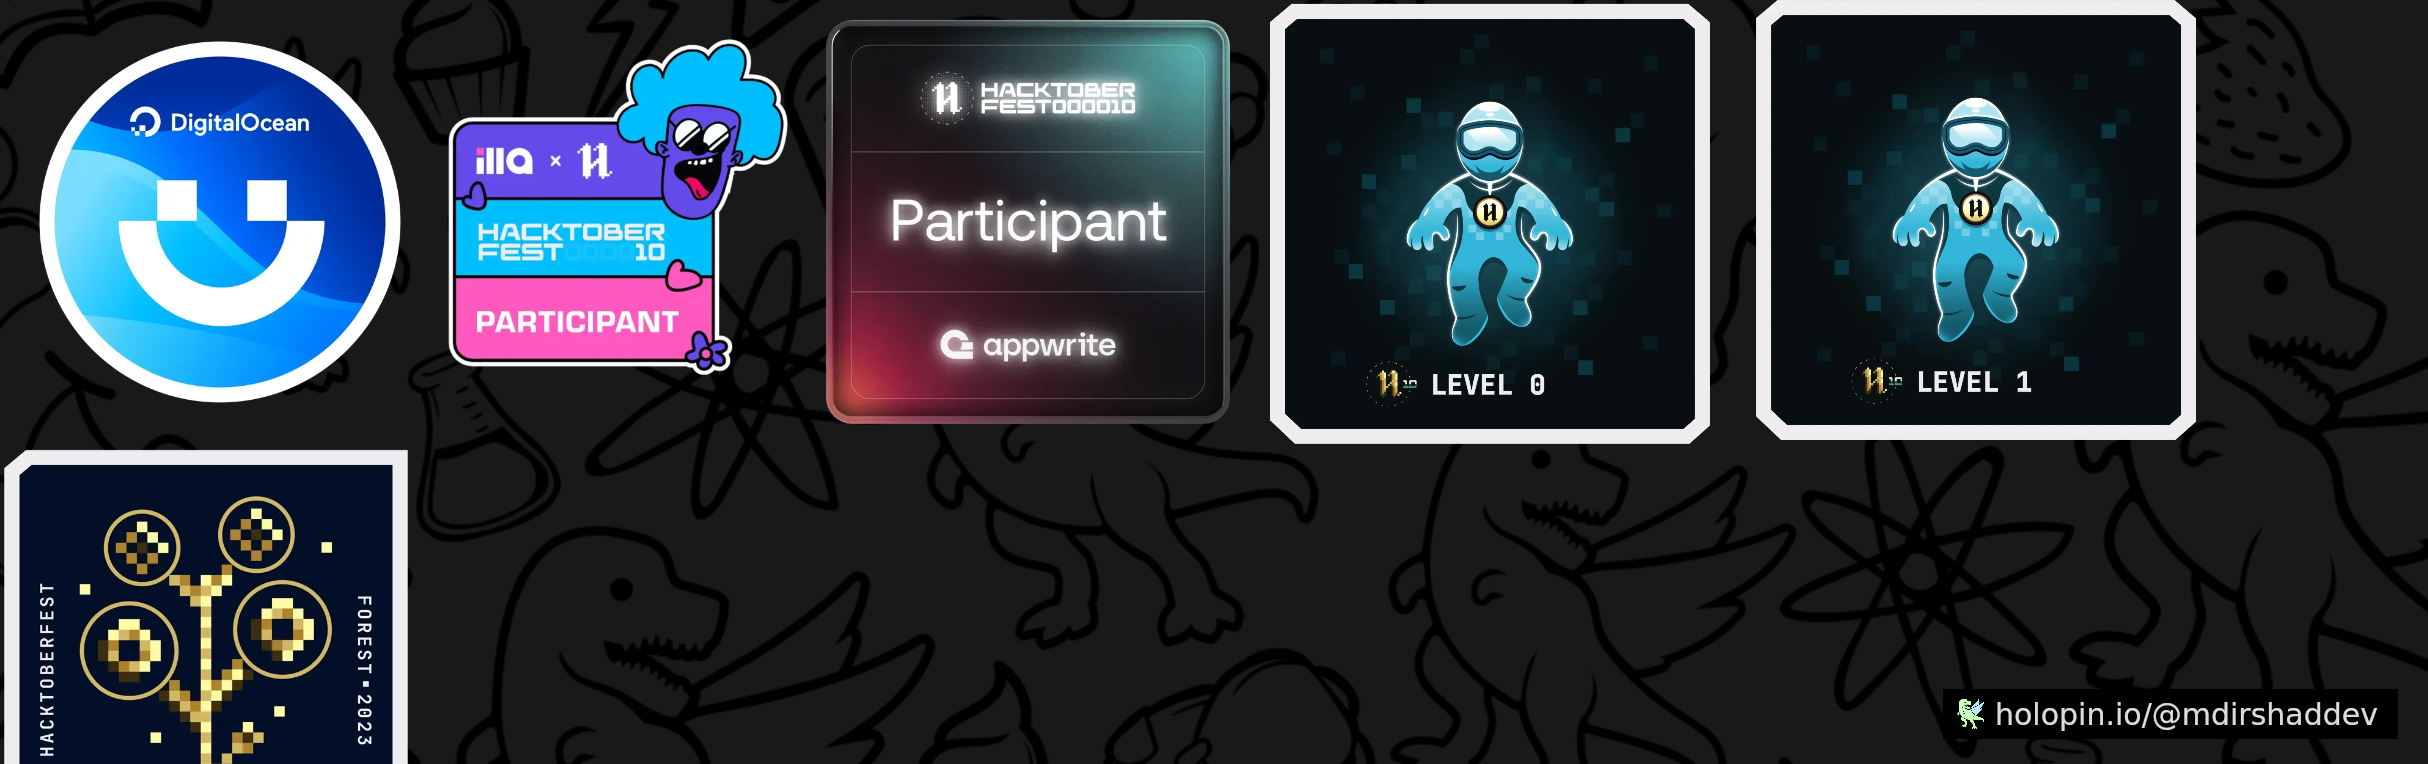 An image of @mdirshaddev's Holopin badges, which is a link to view their full Holopin profile